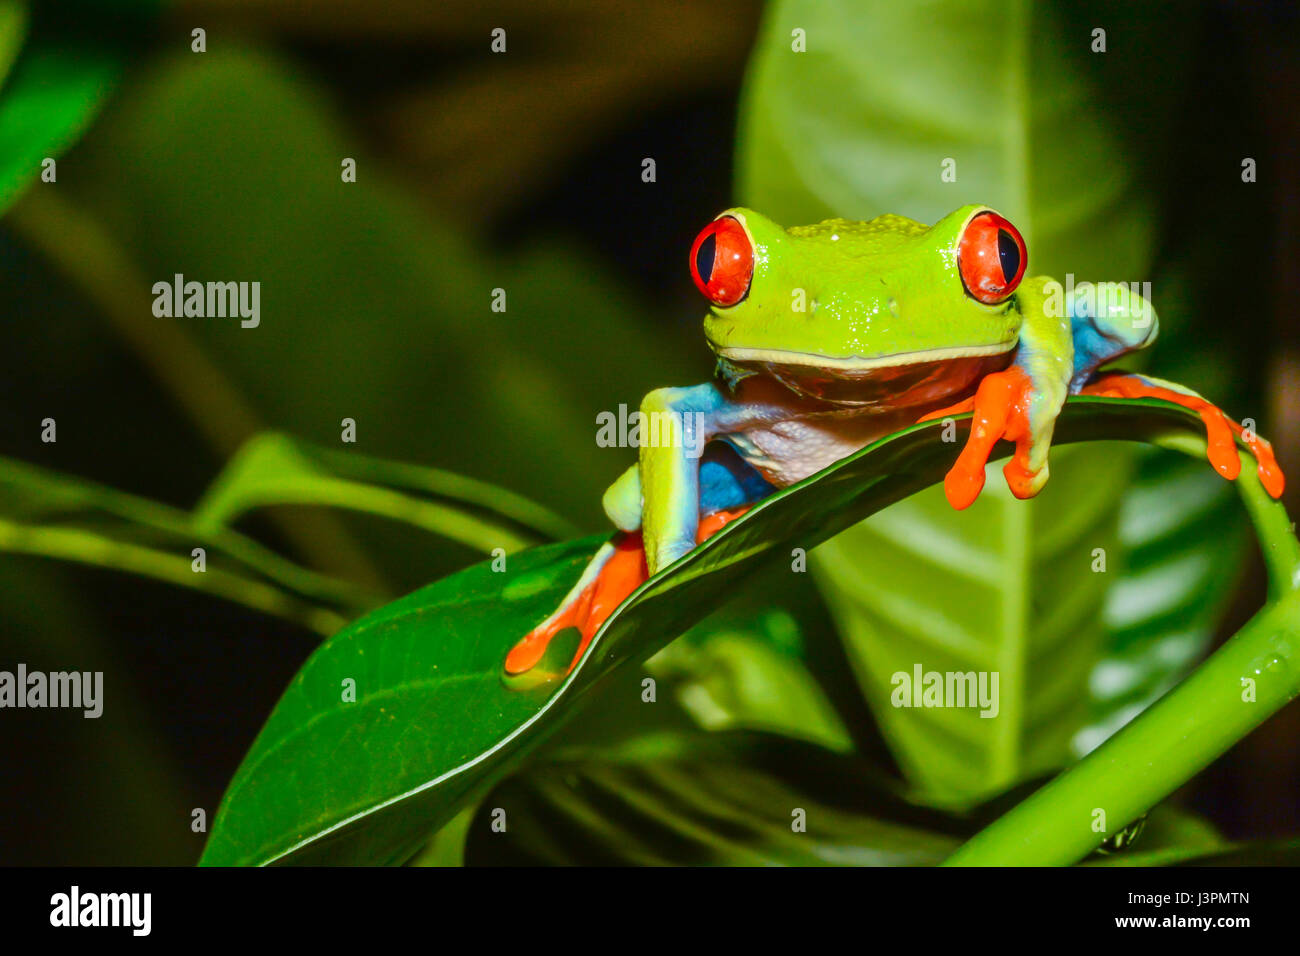 A close up of a Red-eyed Tree Frog in Costa Rica Stock Photo